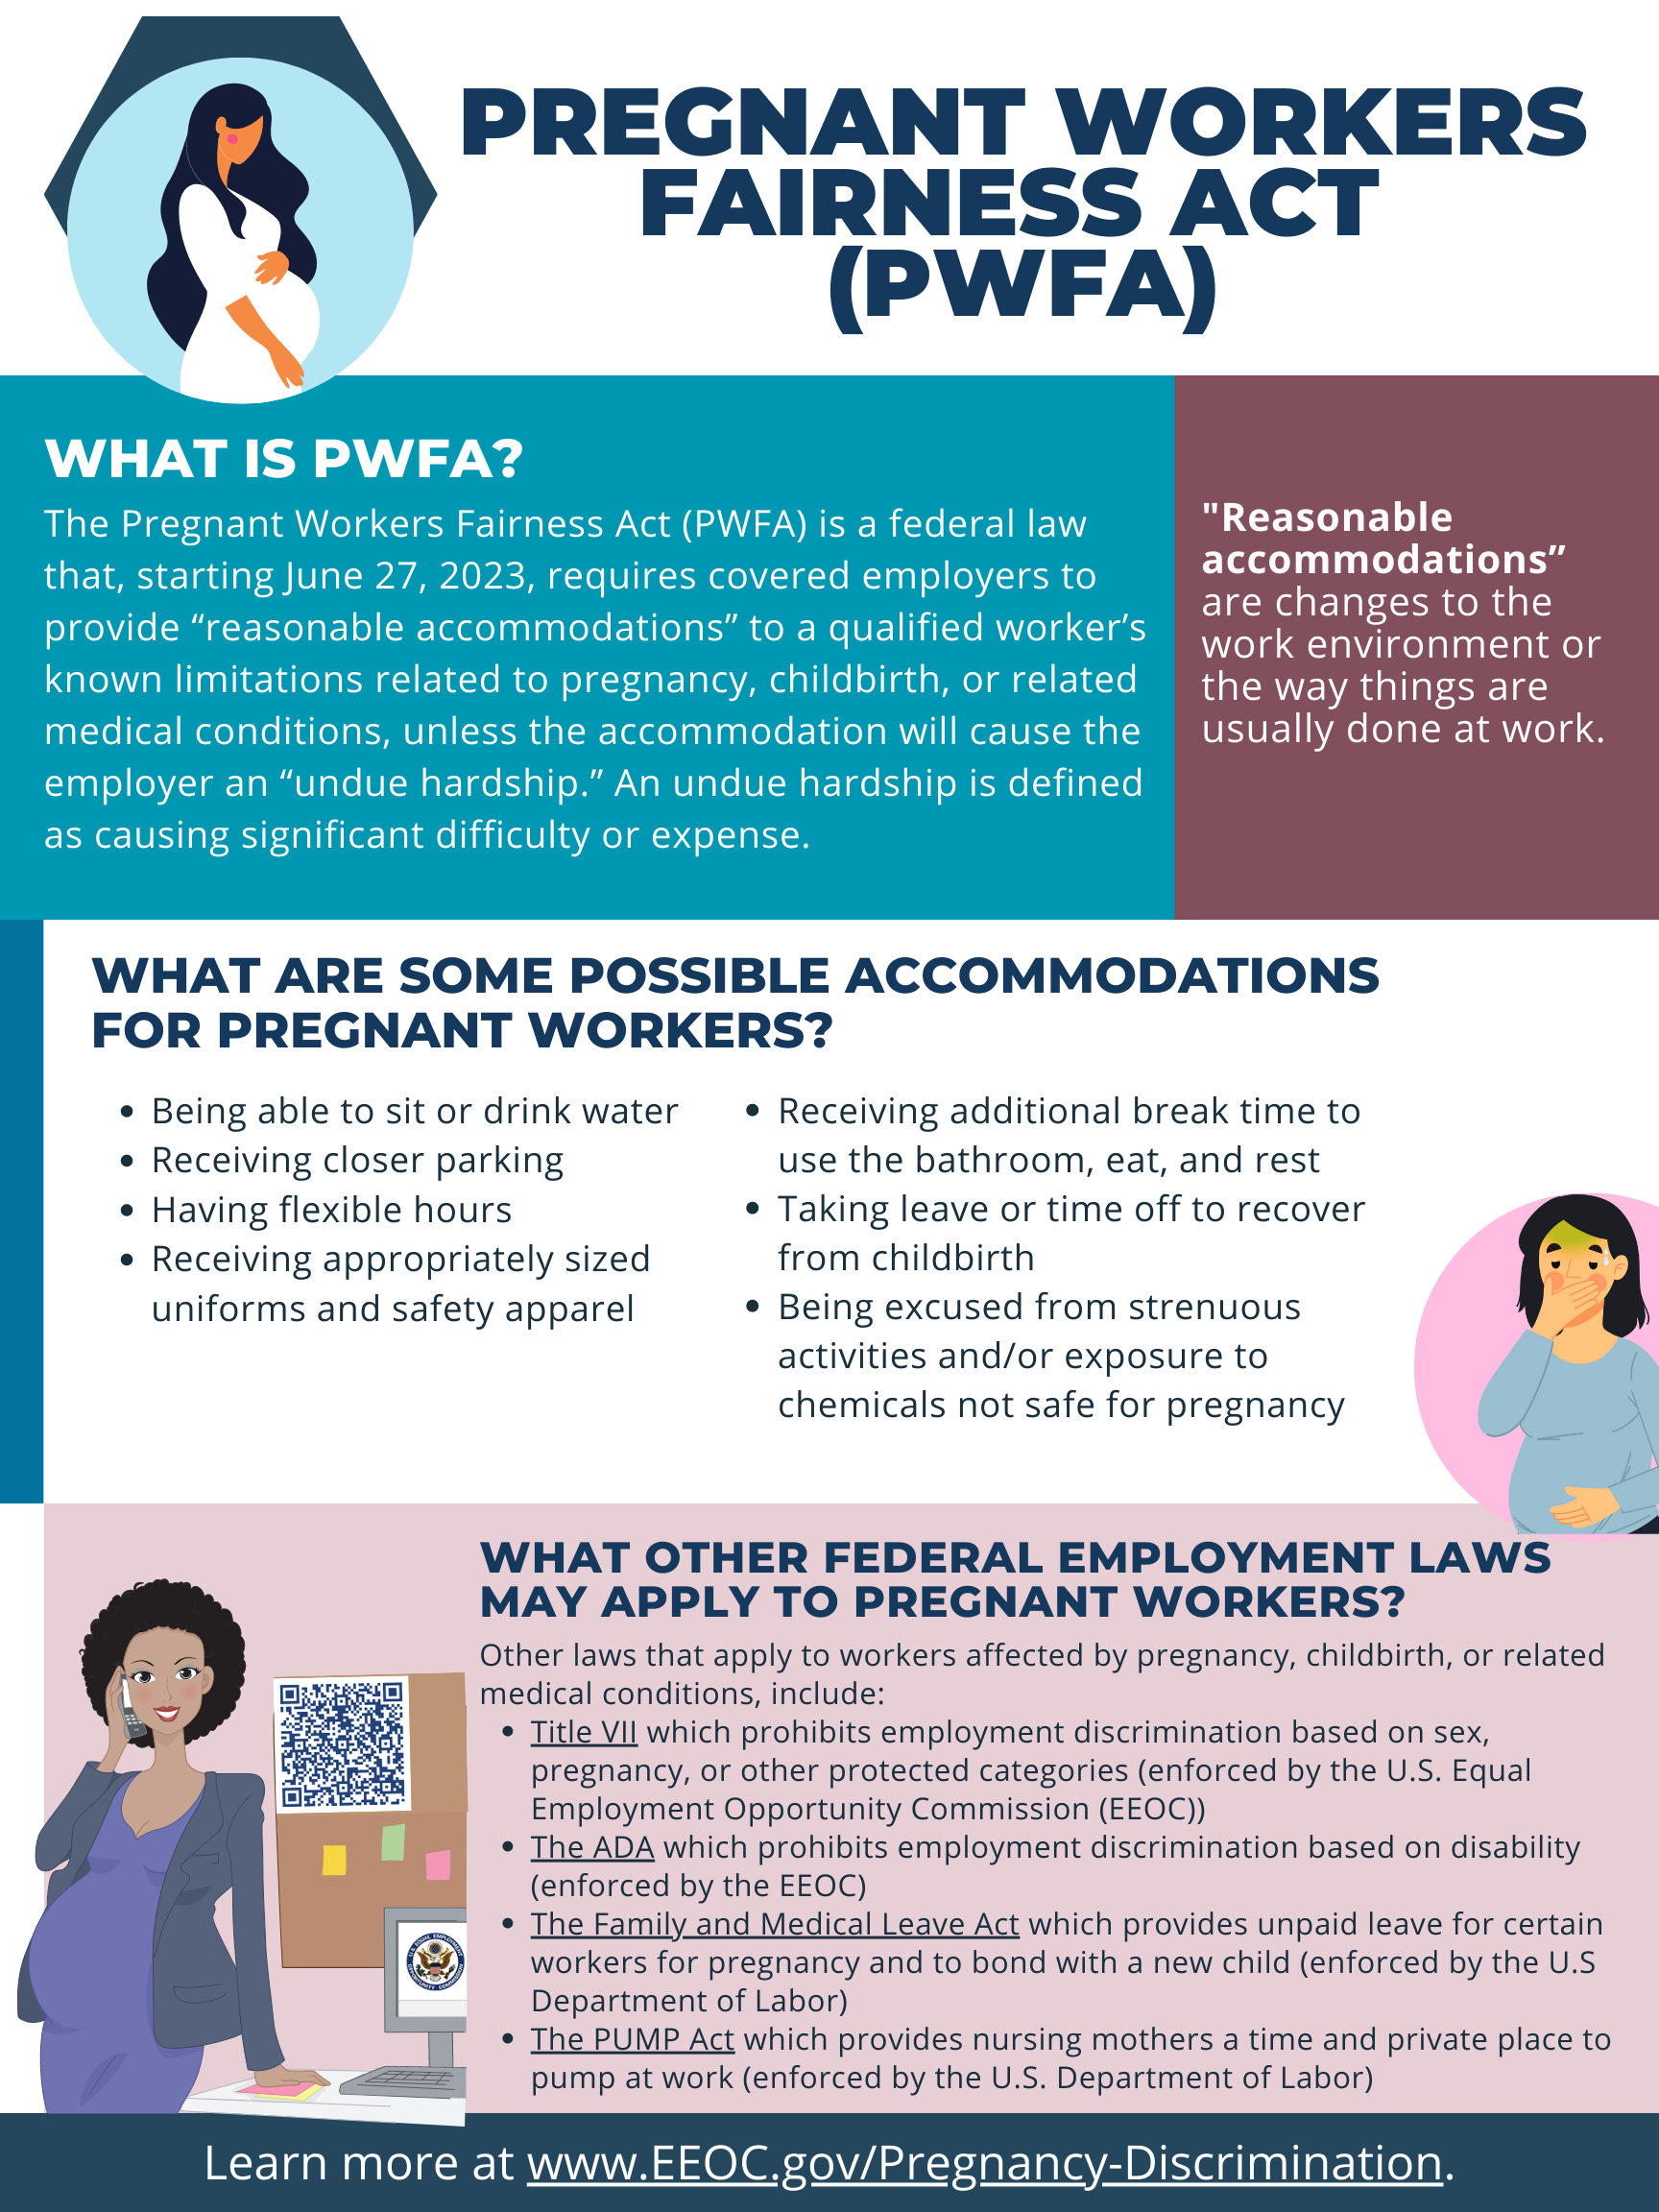 Pregnant Workers Fairness Act (PWFA) goes into effect on June 27, 2023